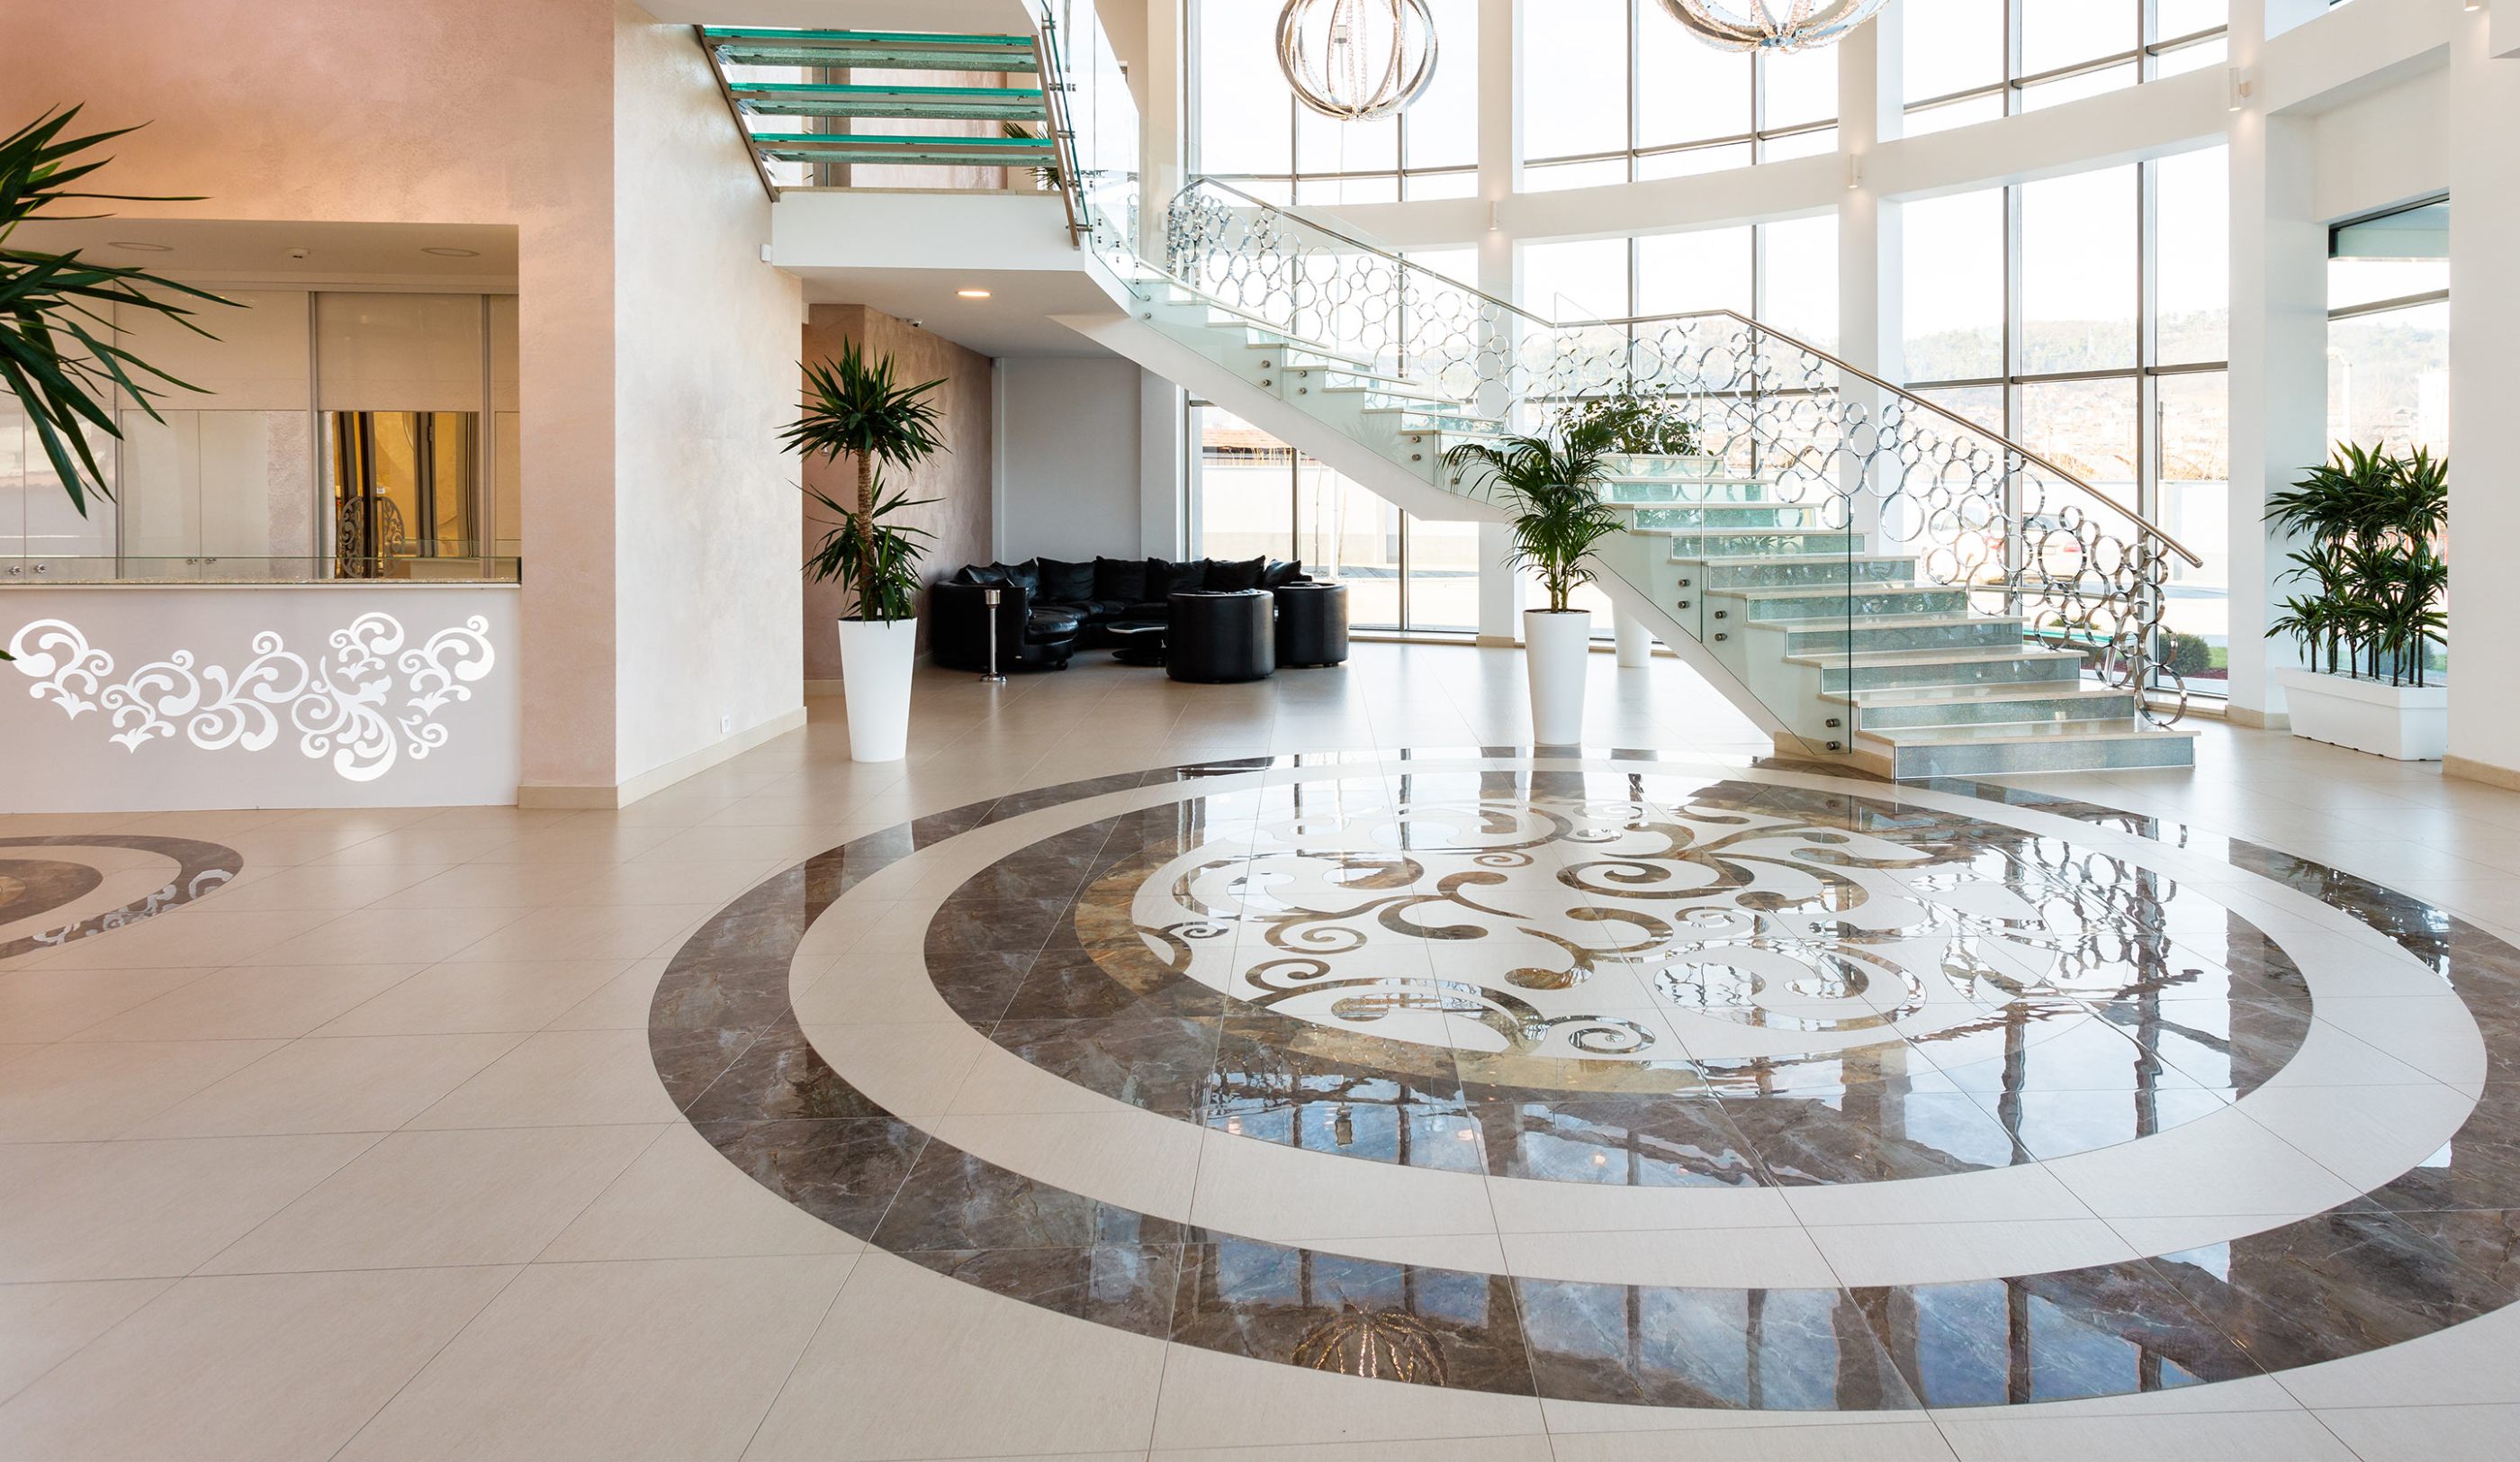 Polished lobby with elegant staircase